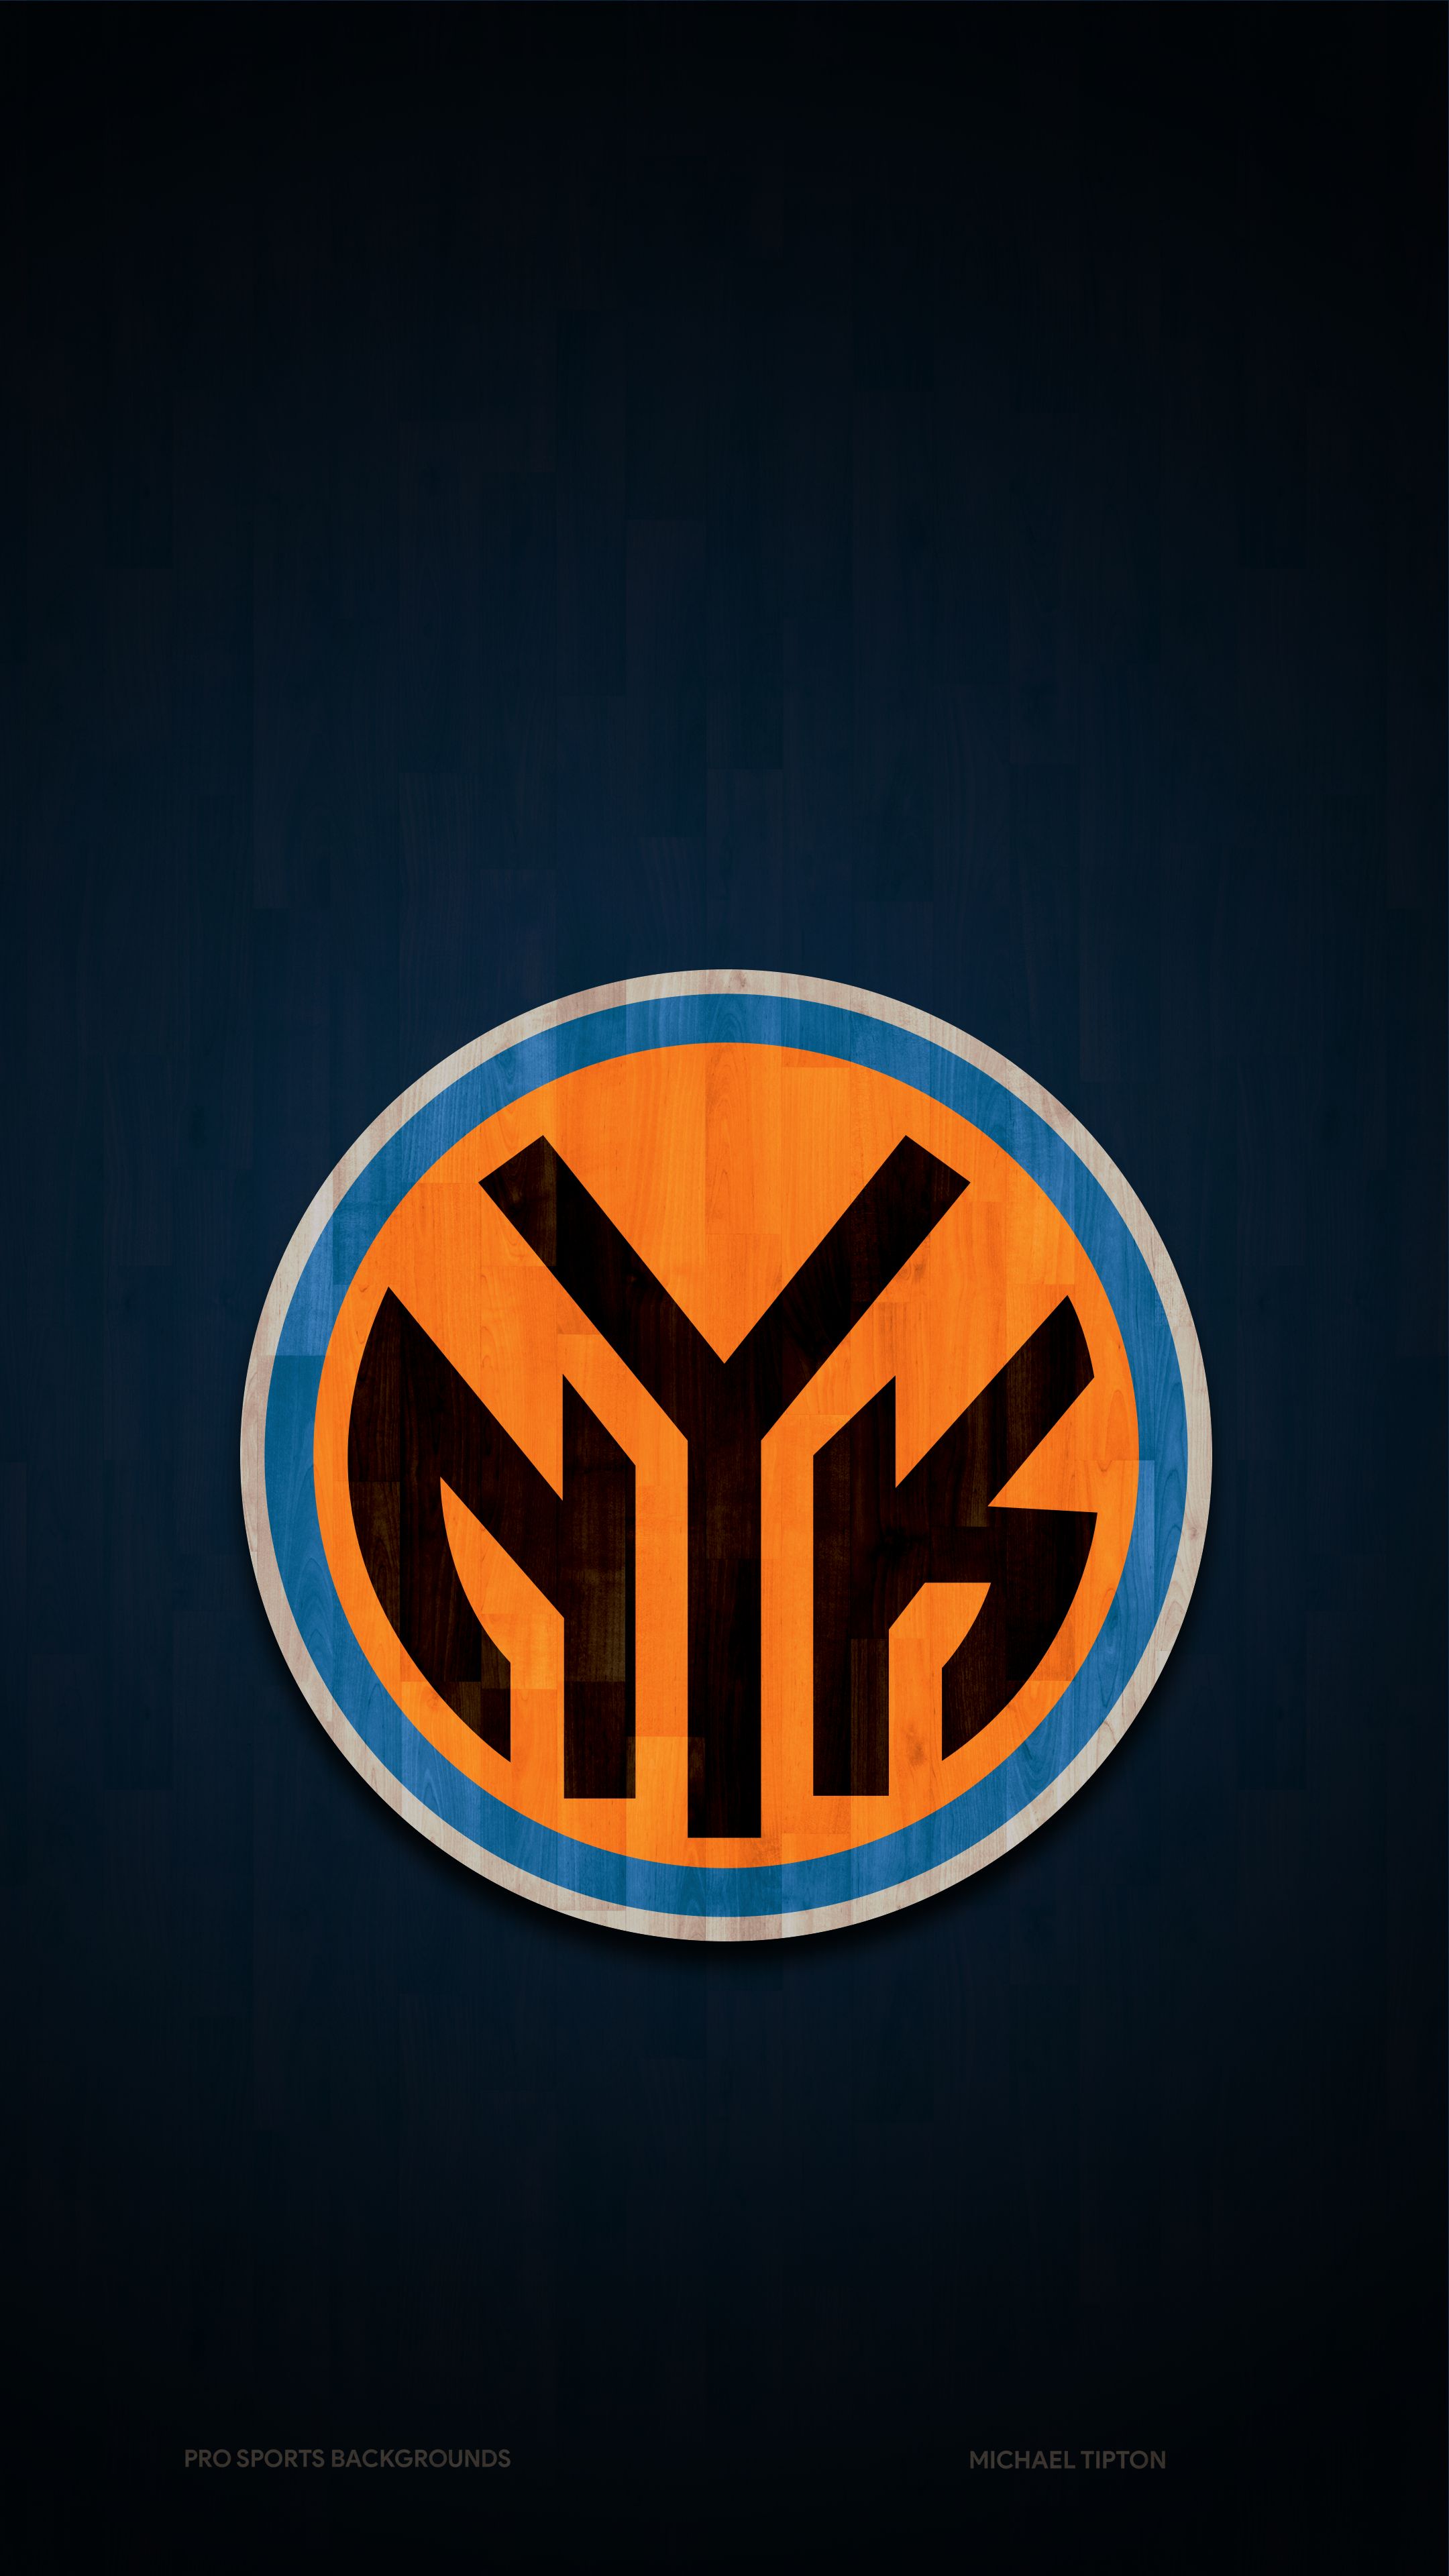 Mobile wallpaper: Sports, Basketball, Nba, New York Knicks, 1176693  download the picture for free.